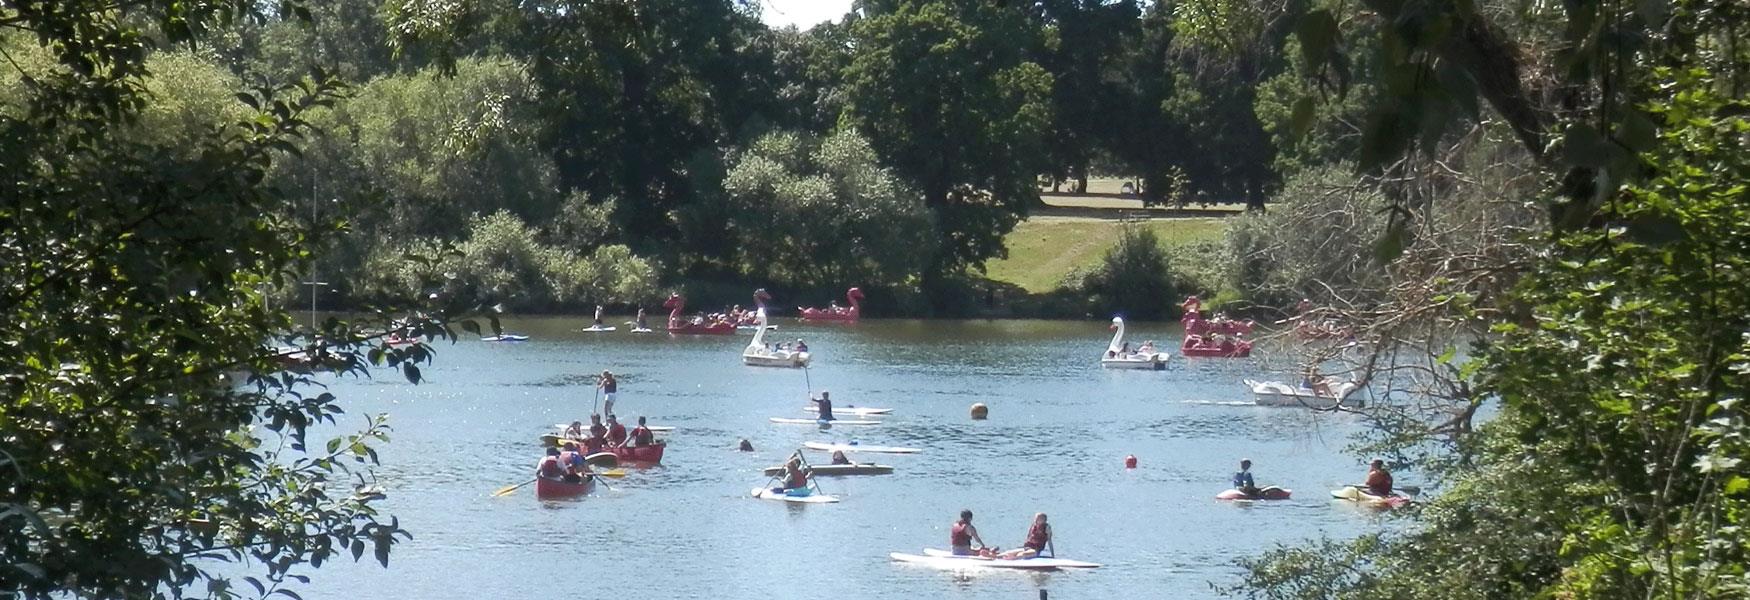 Mote Park is a great place for a family.  Plenty of space for a picnic with loads to do.  Watersports Centre, Outdoor Adventure with Climbing Wall, Segways, High Ropes and mini golf.  Large Children's play area.